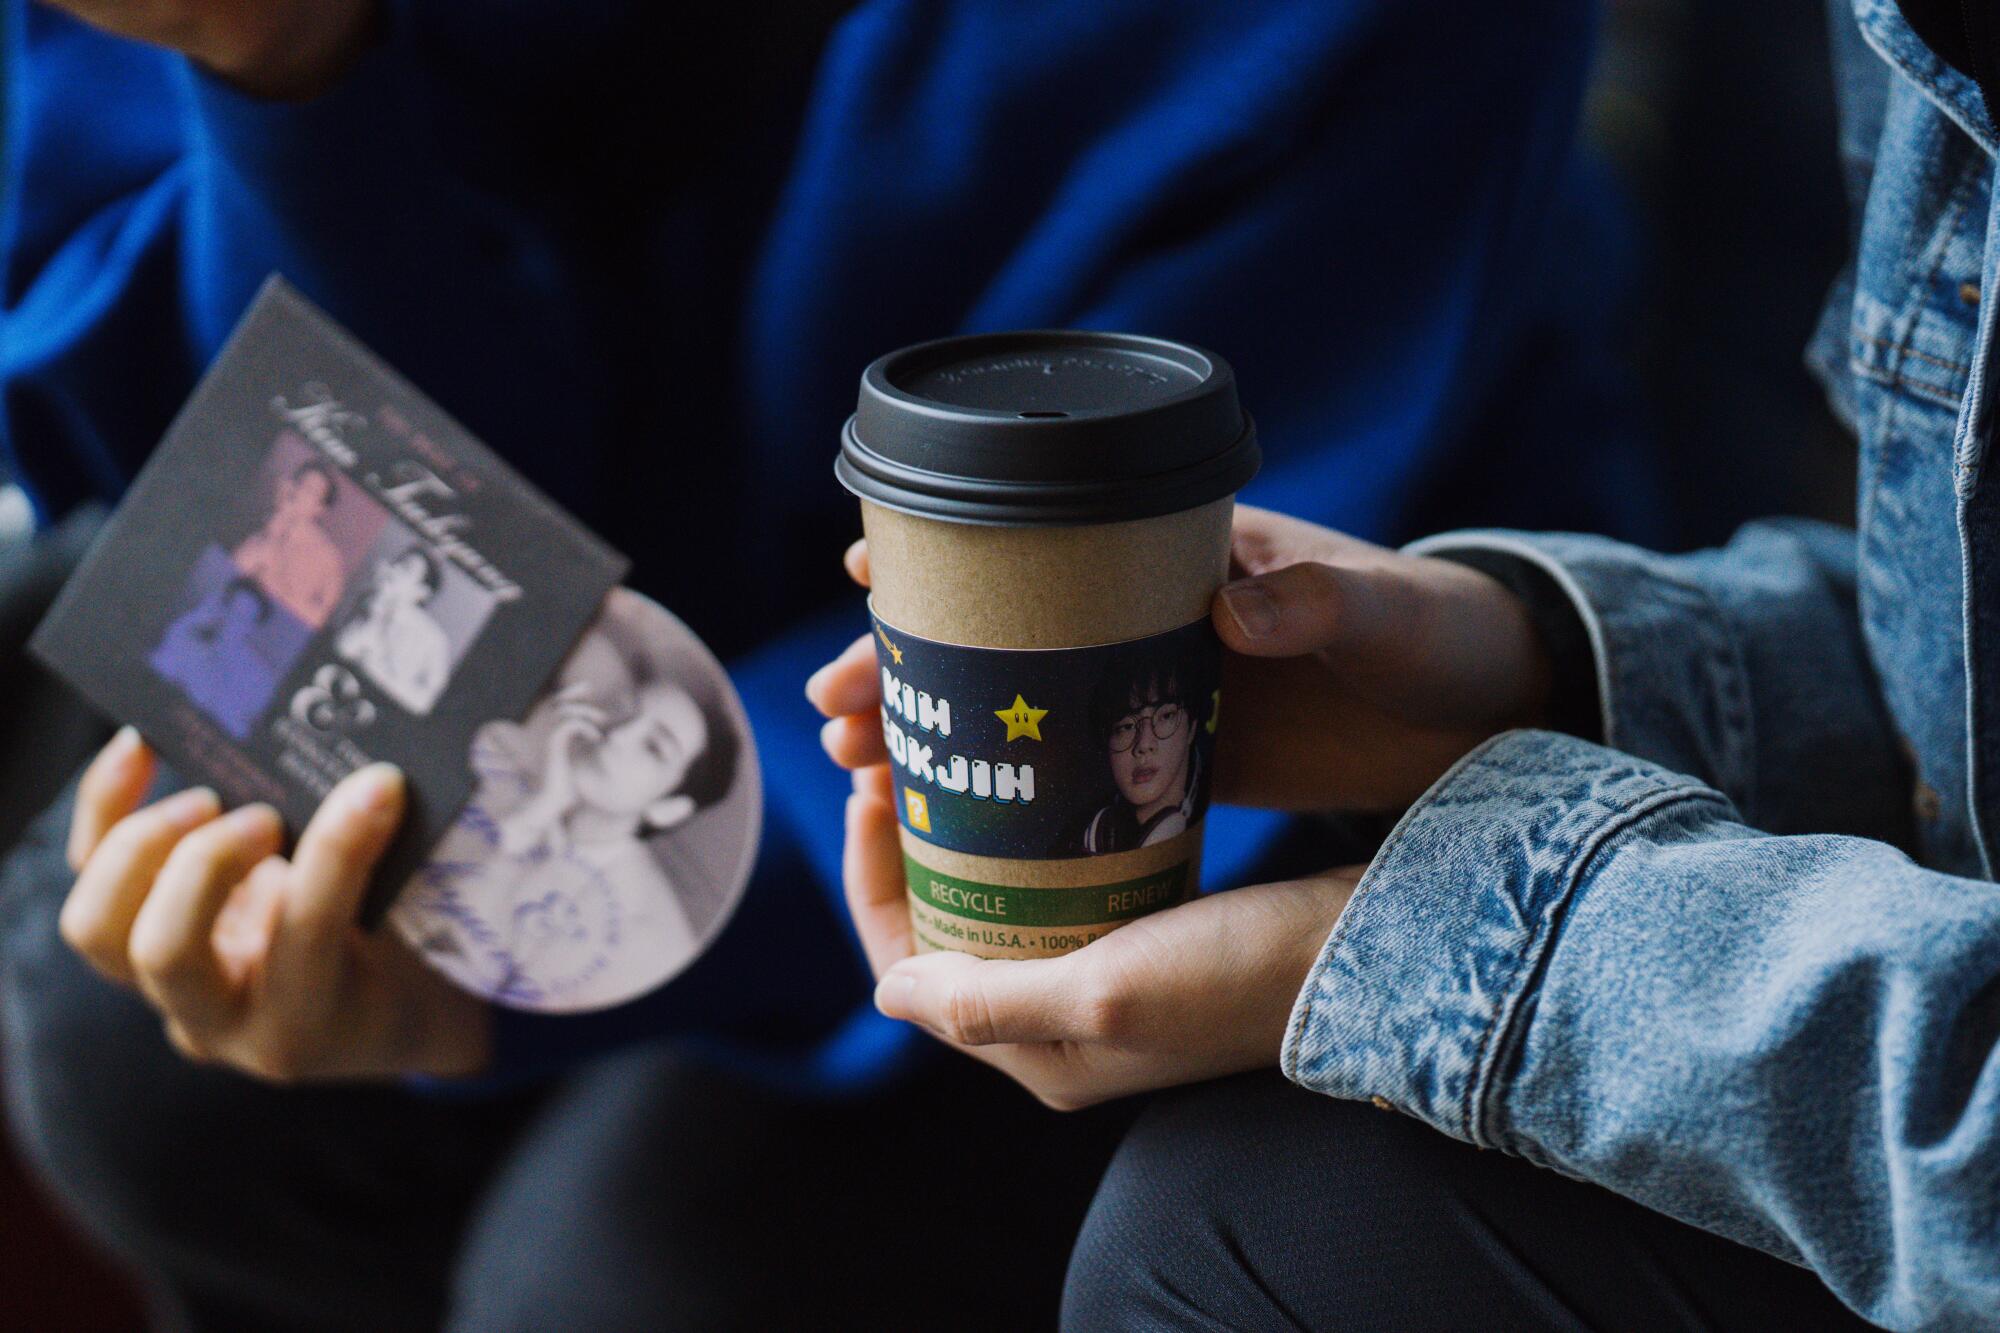 Hands holding a K-pop CD and a drink with a cupsleeve